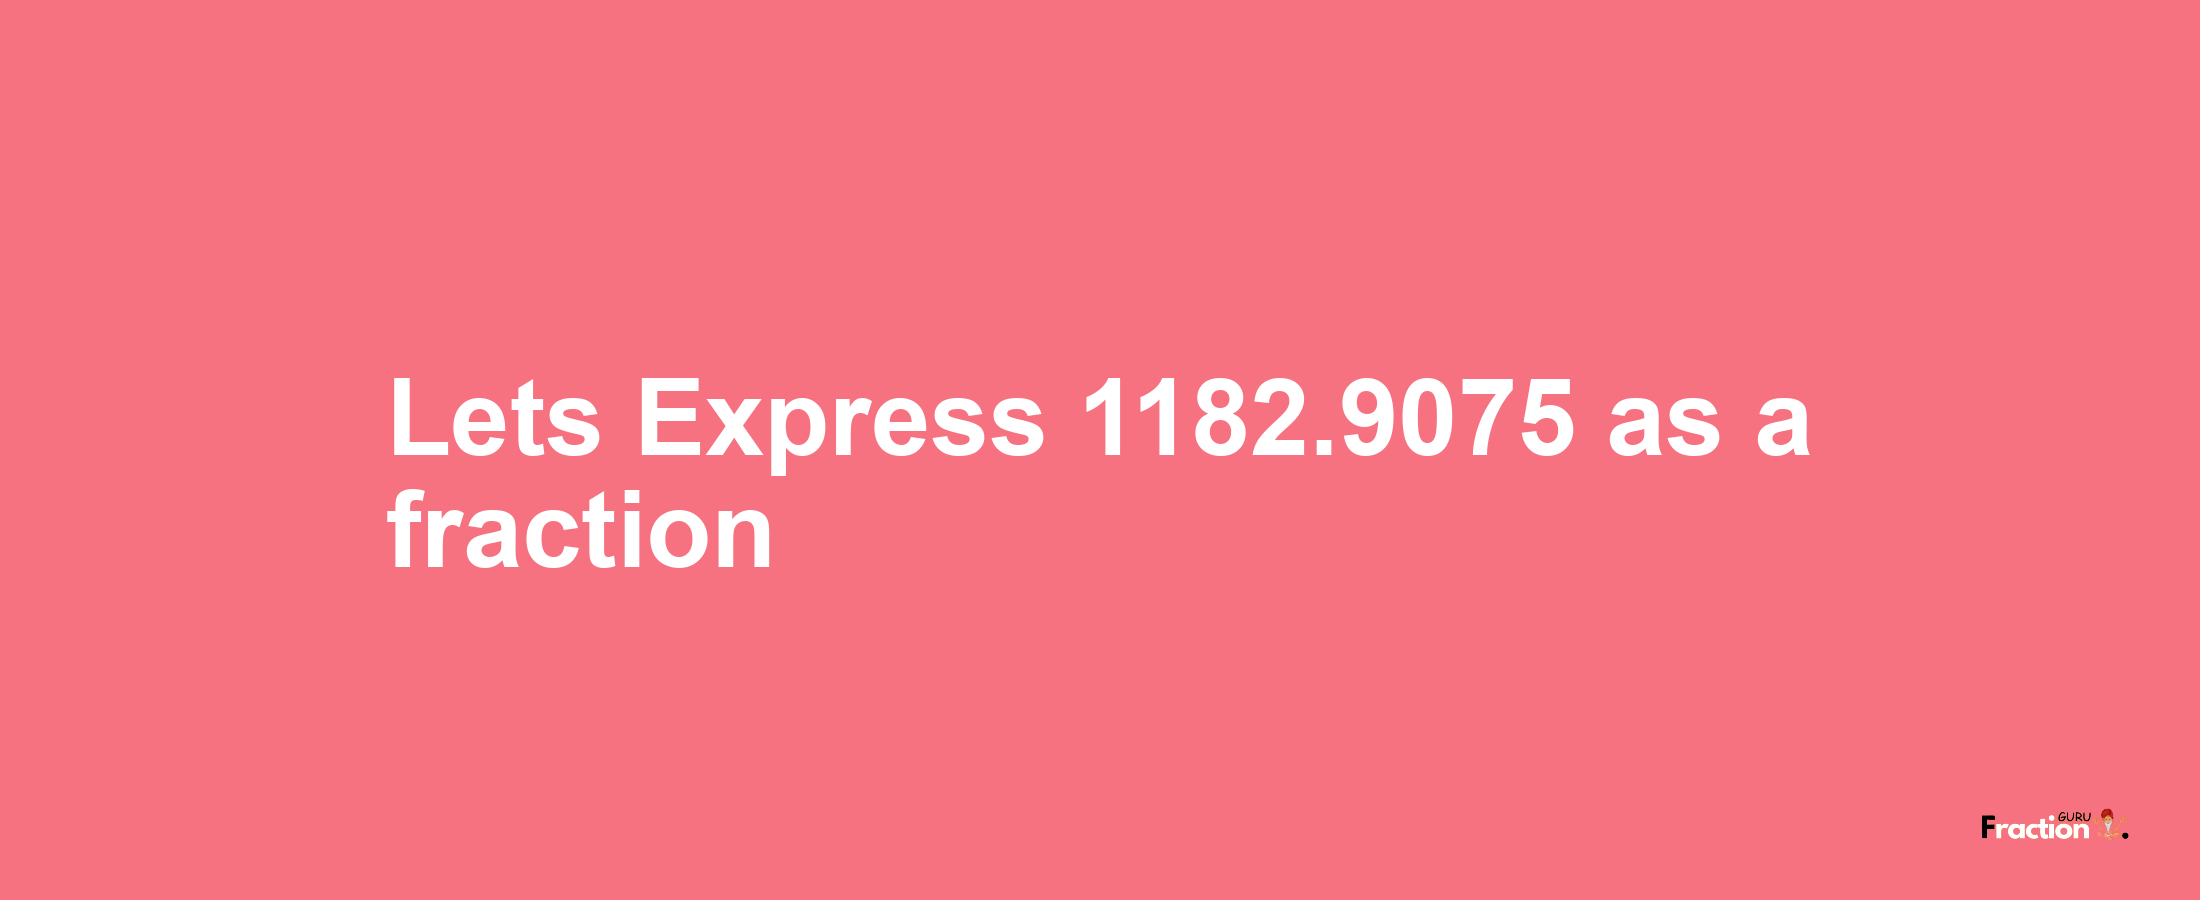 Lets Express 1182.9075 as afraction